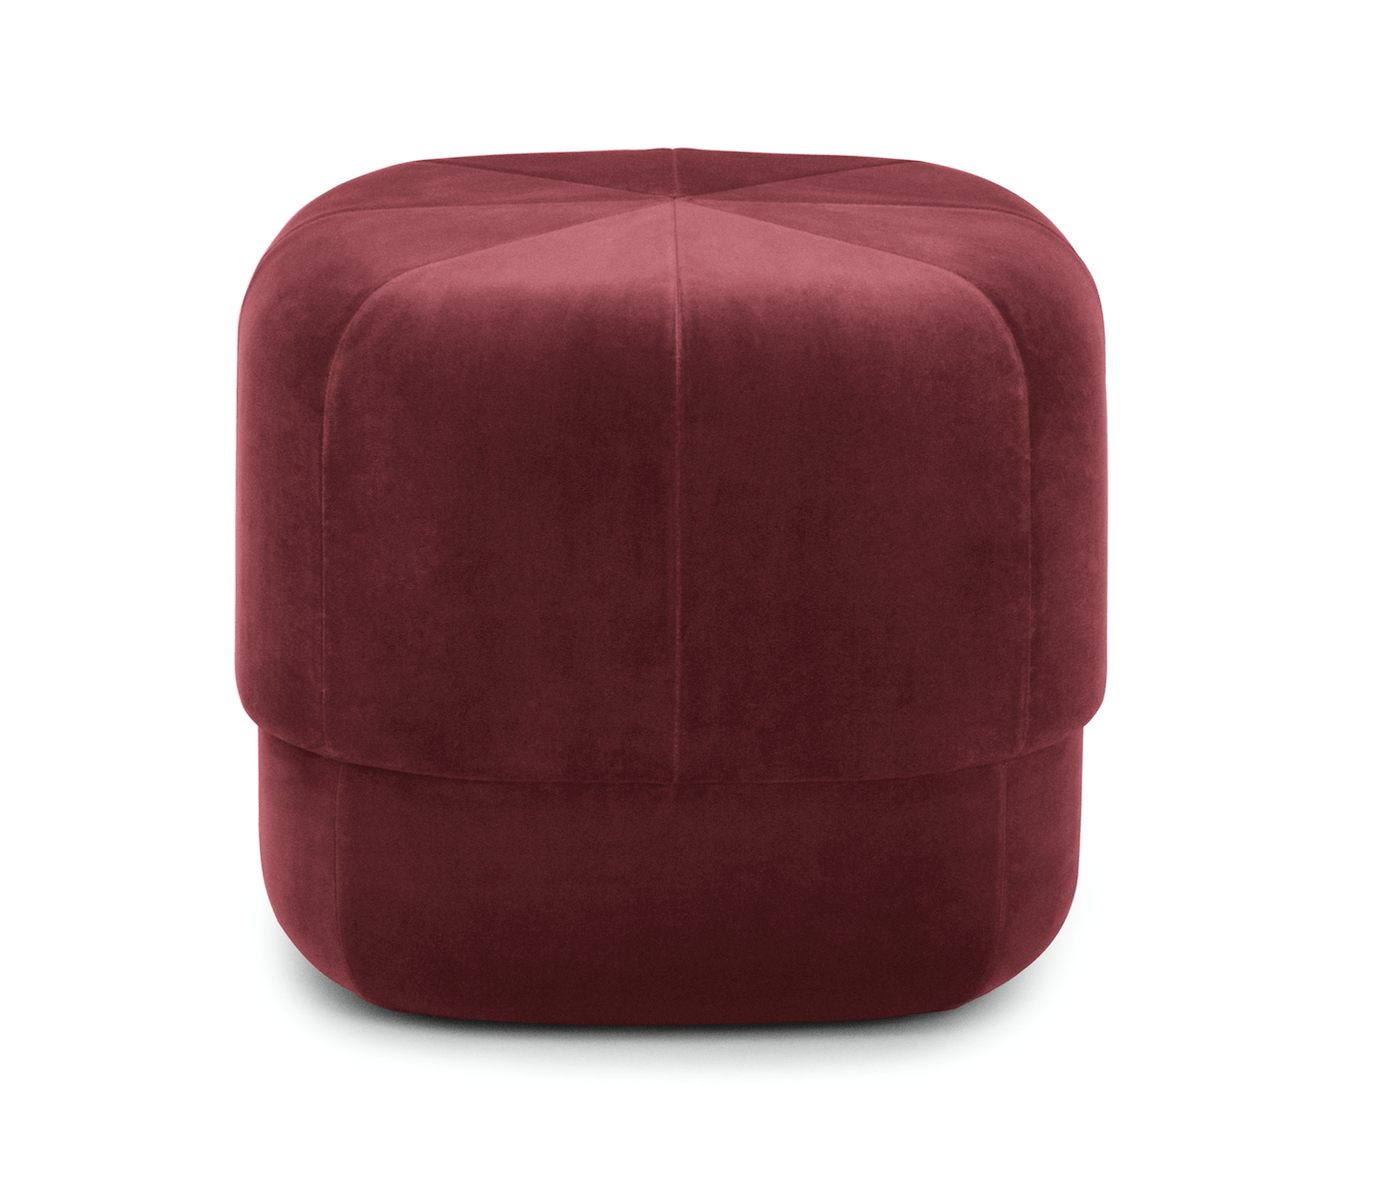 Circus Pouf - Small / Dark Red